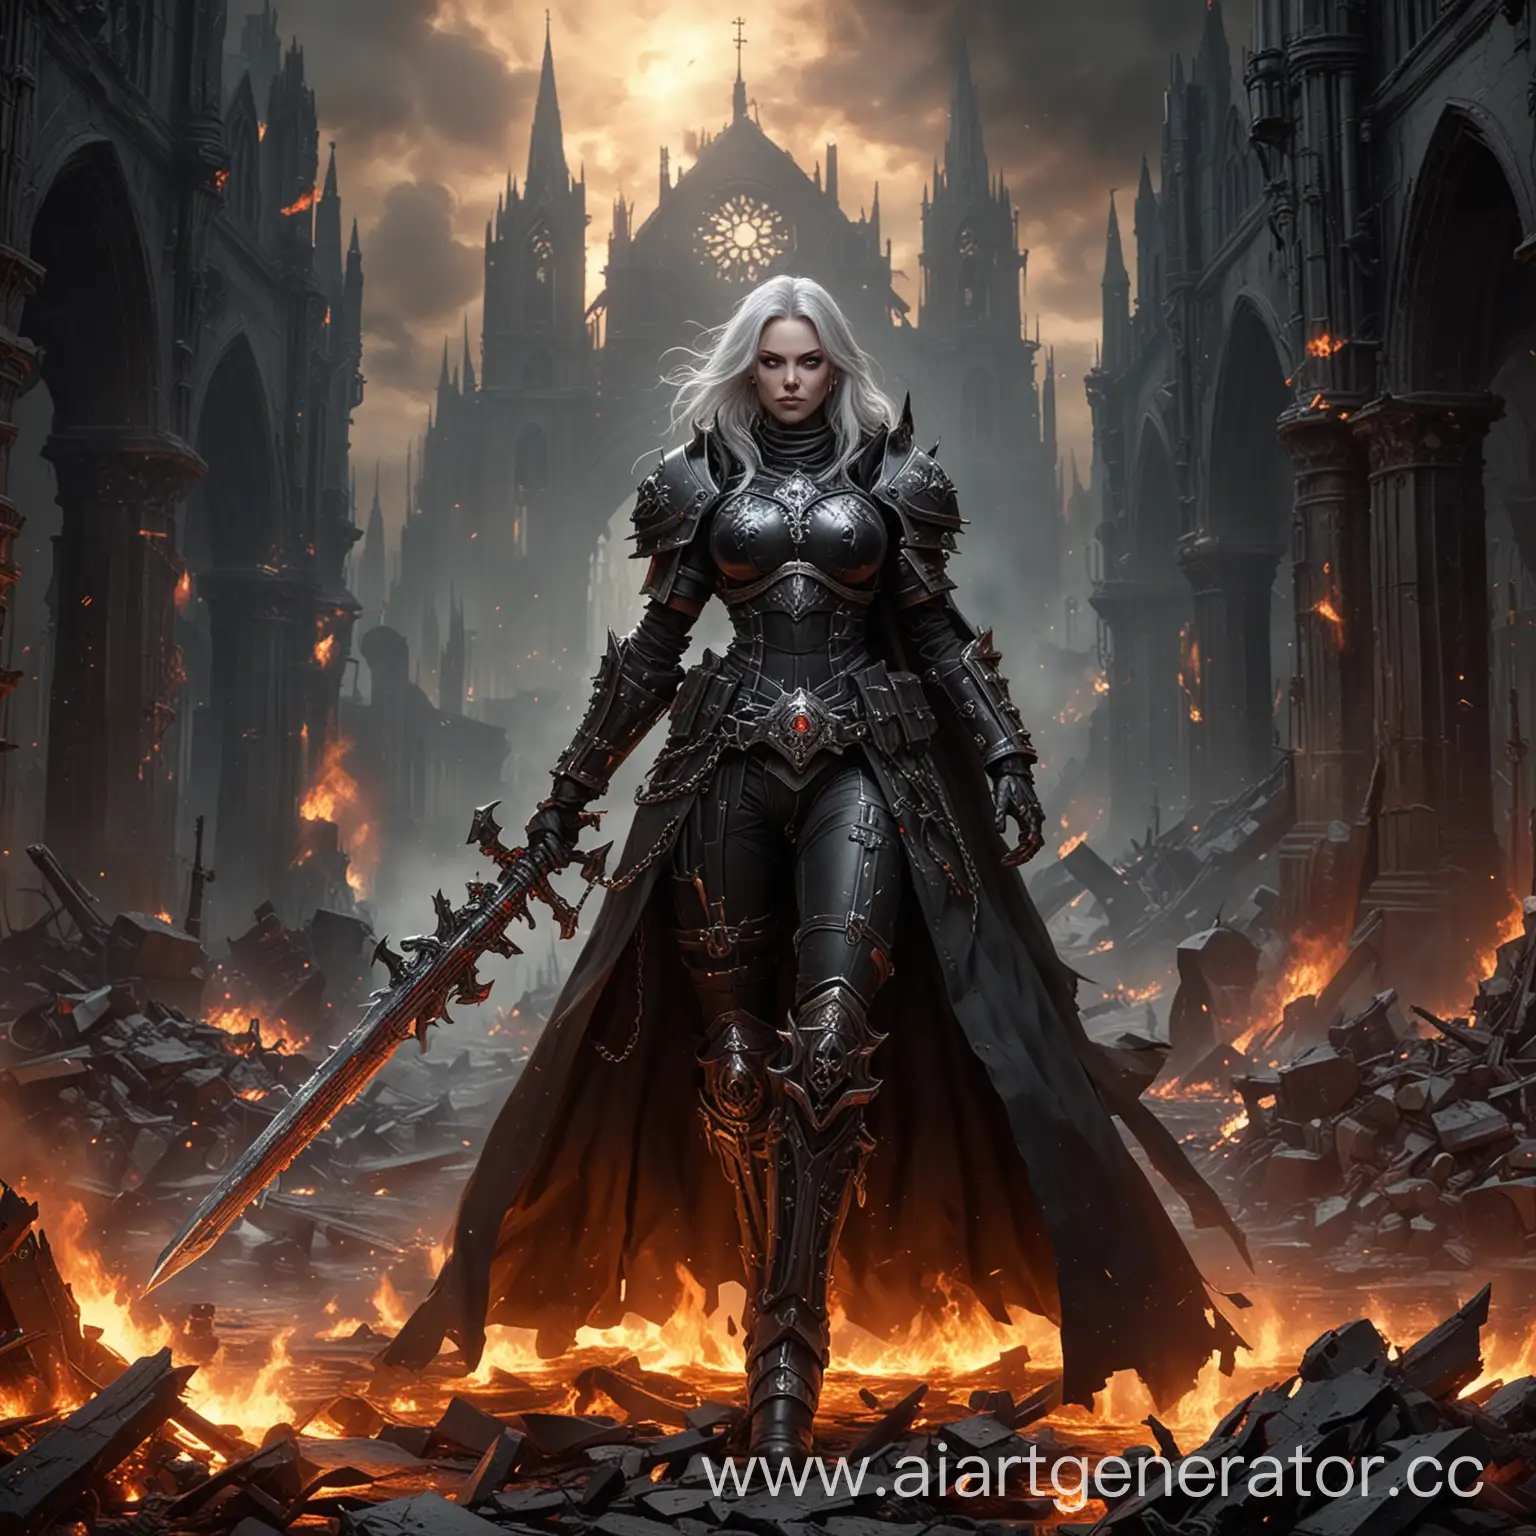 Battle-Sister-in-White-Cloak-and-Black-Armor-with-Chain-Sword-at-Burning-Cathedral